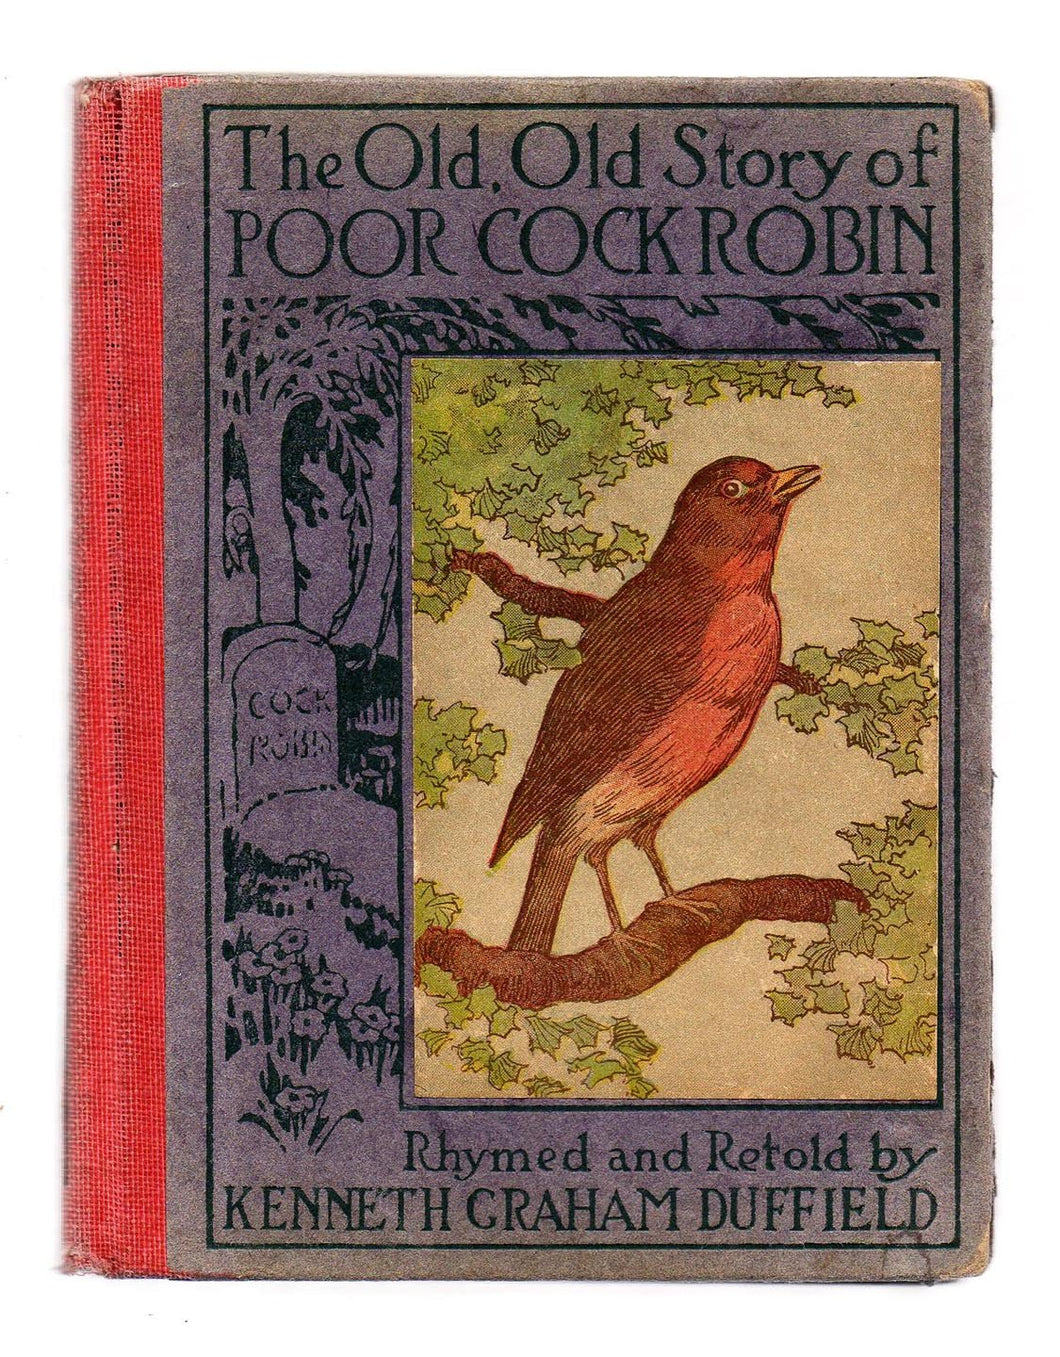 The Old Old Story of Poor Cock Robin Rhymed and Retold